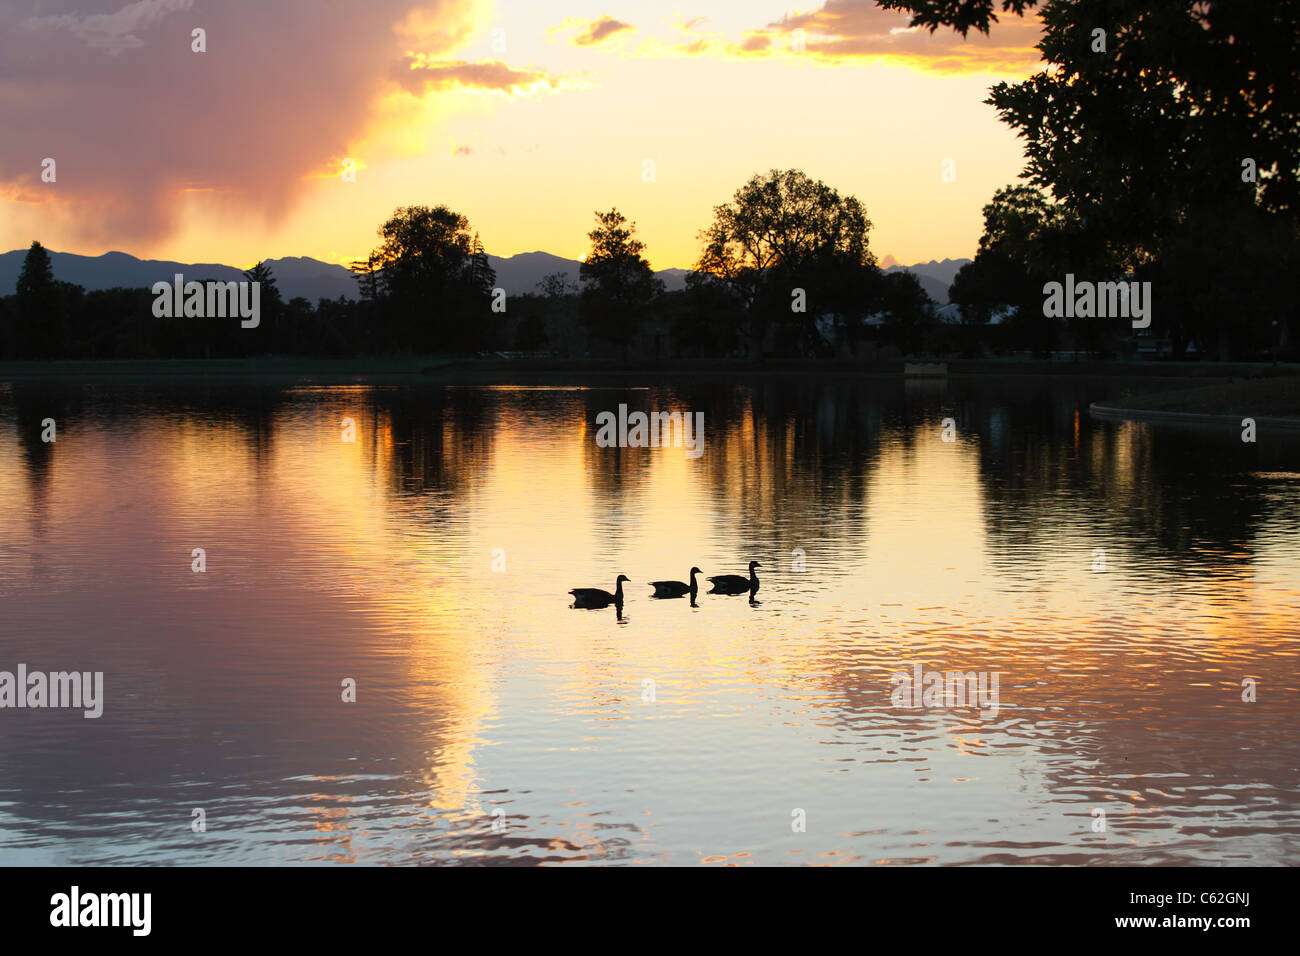 A view of the sun setting over Denver, Colorado. Image captured at City Park over Ferril Lake Stock Photo